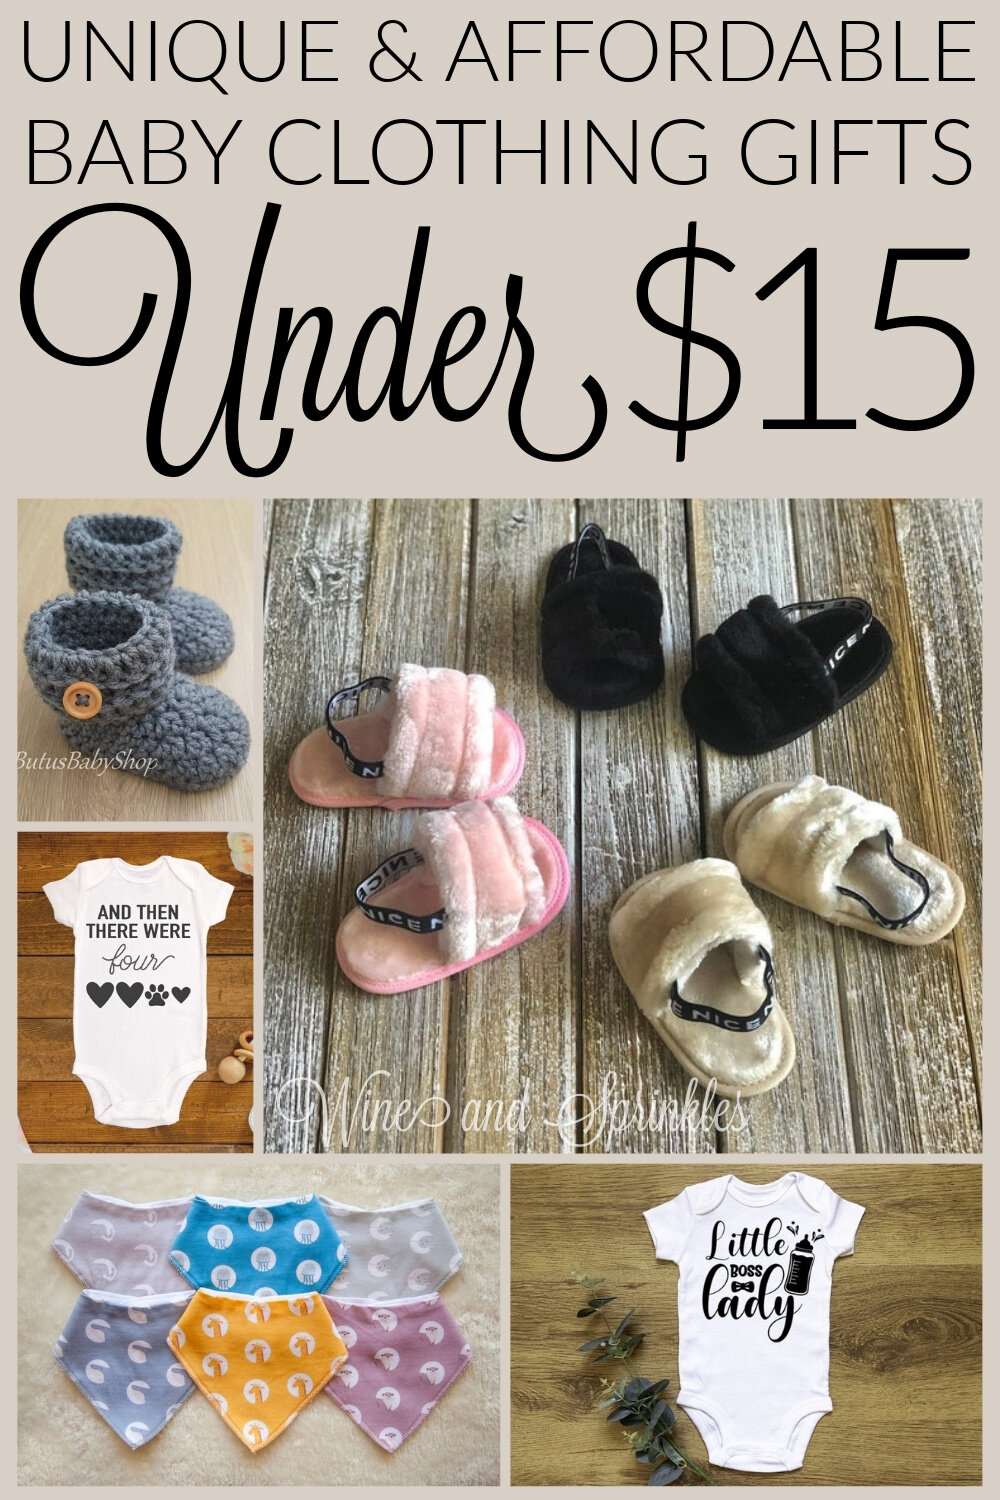 Cheap and Unique Baby Onesies and Wardrobe Accessories Under $15